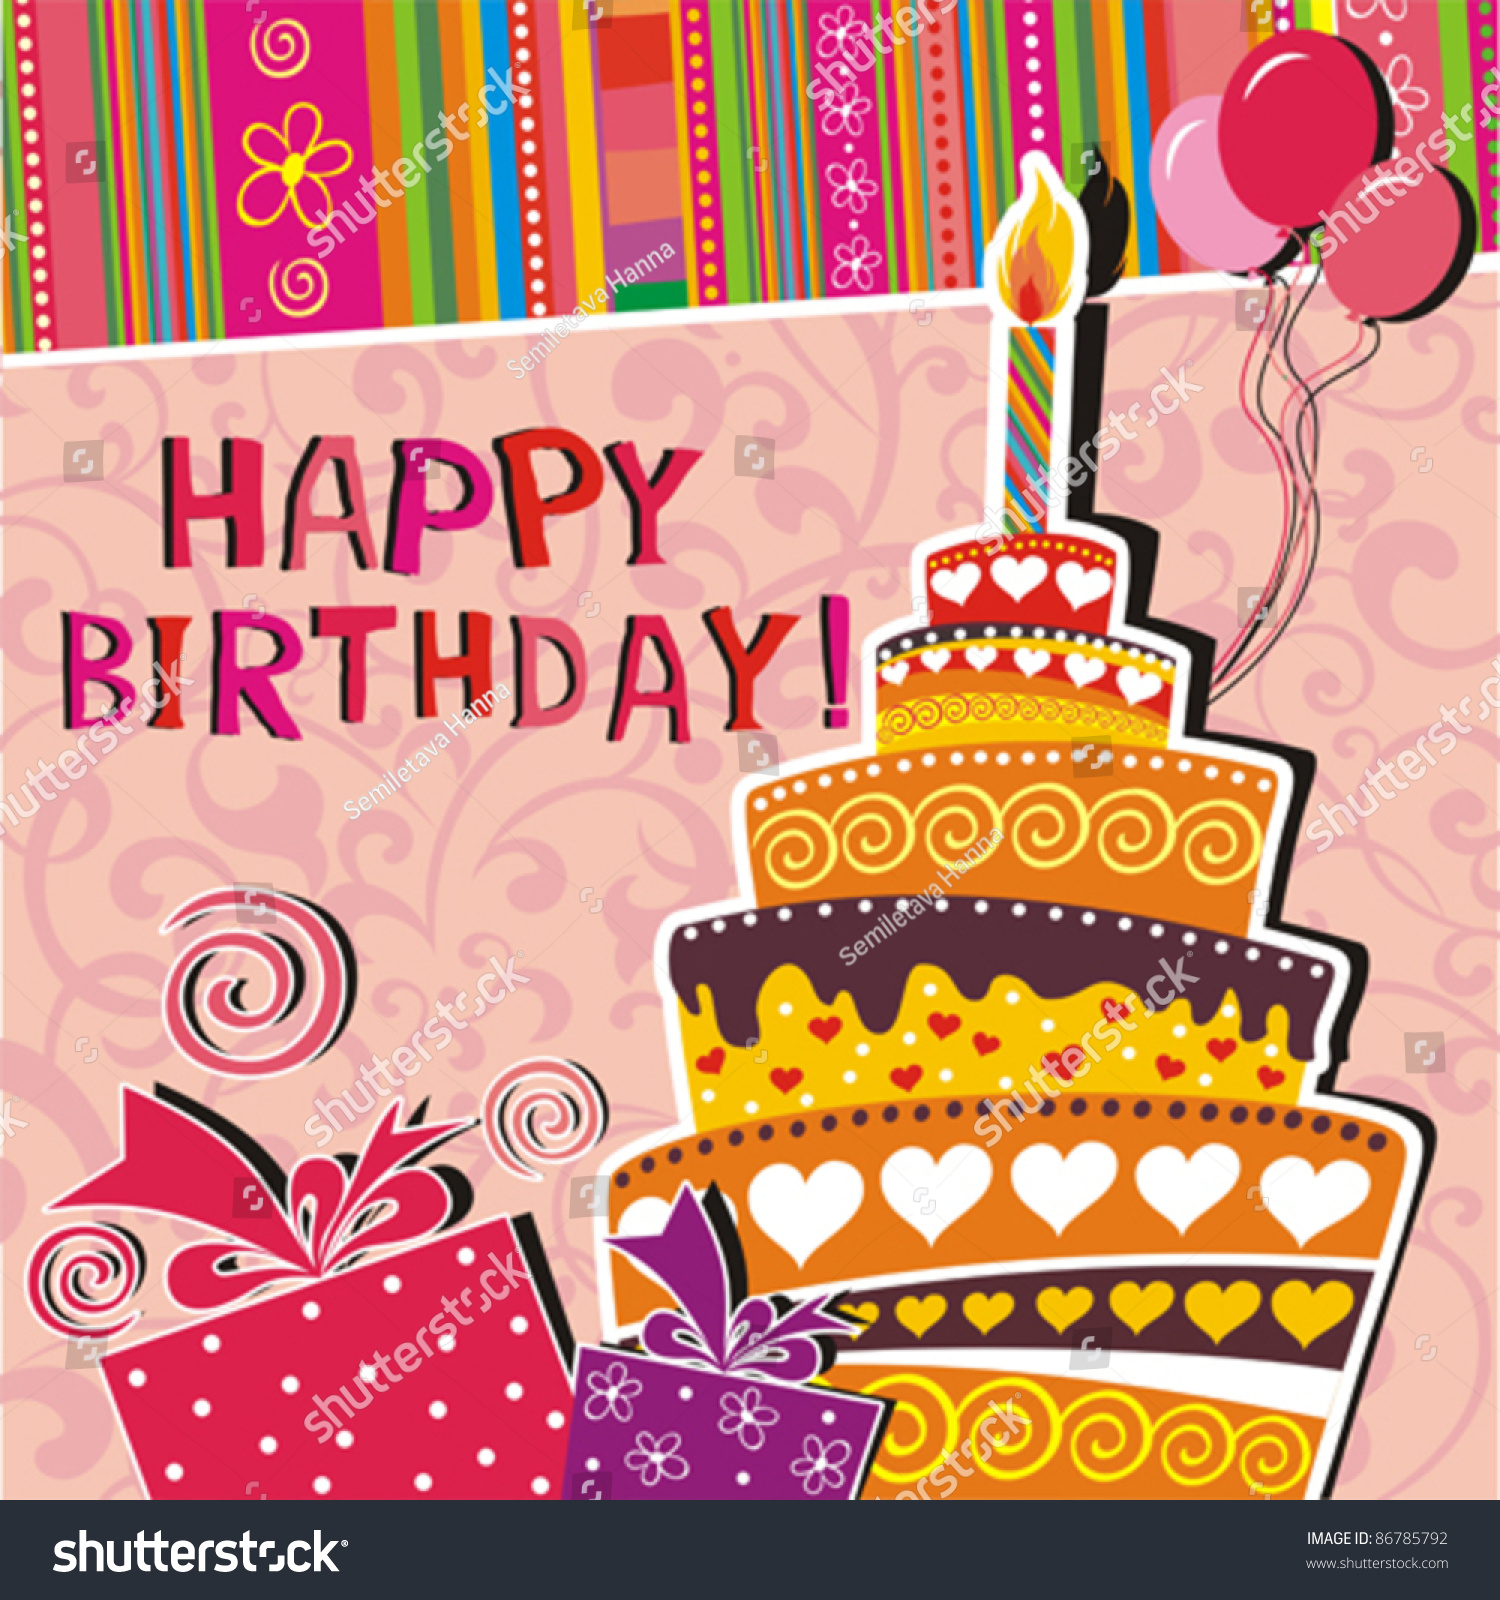 Vector Card With Birthday Cake - 86785792 : Shutterstock